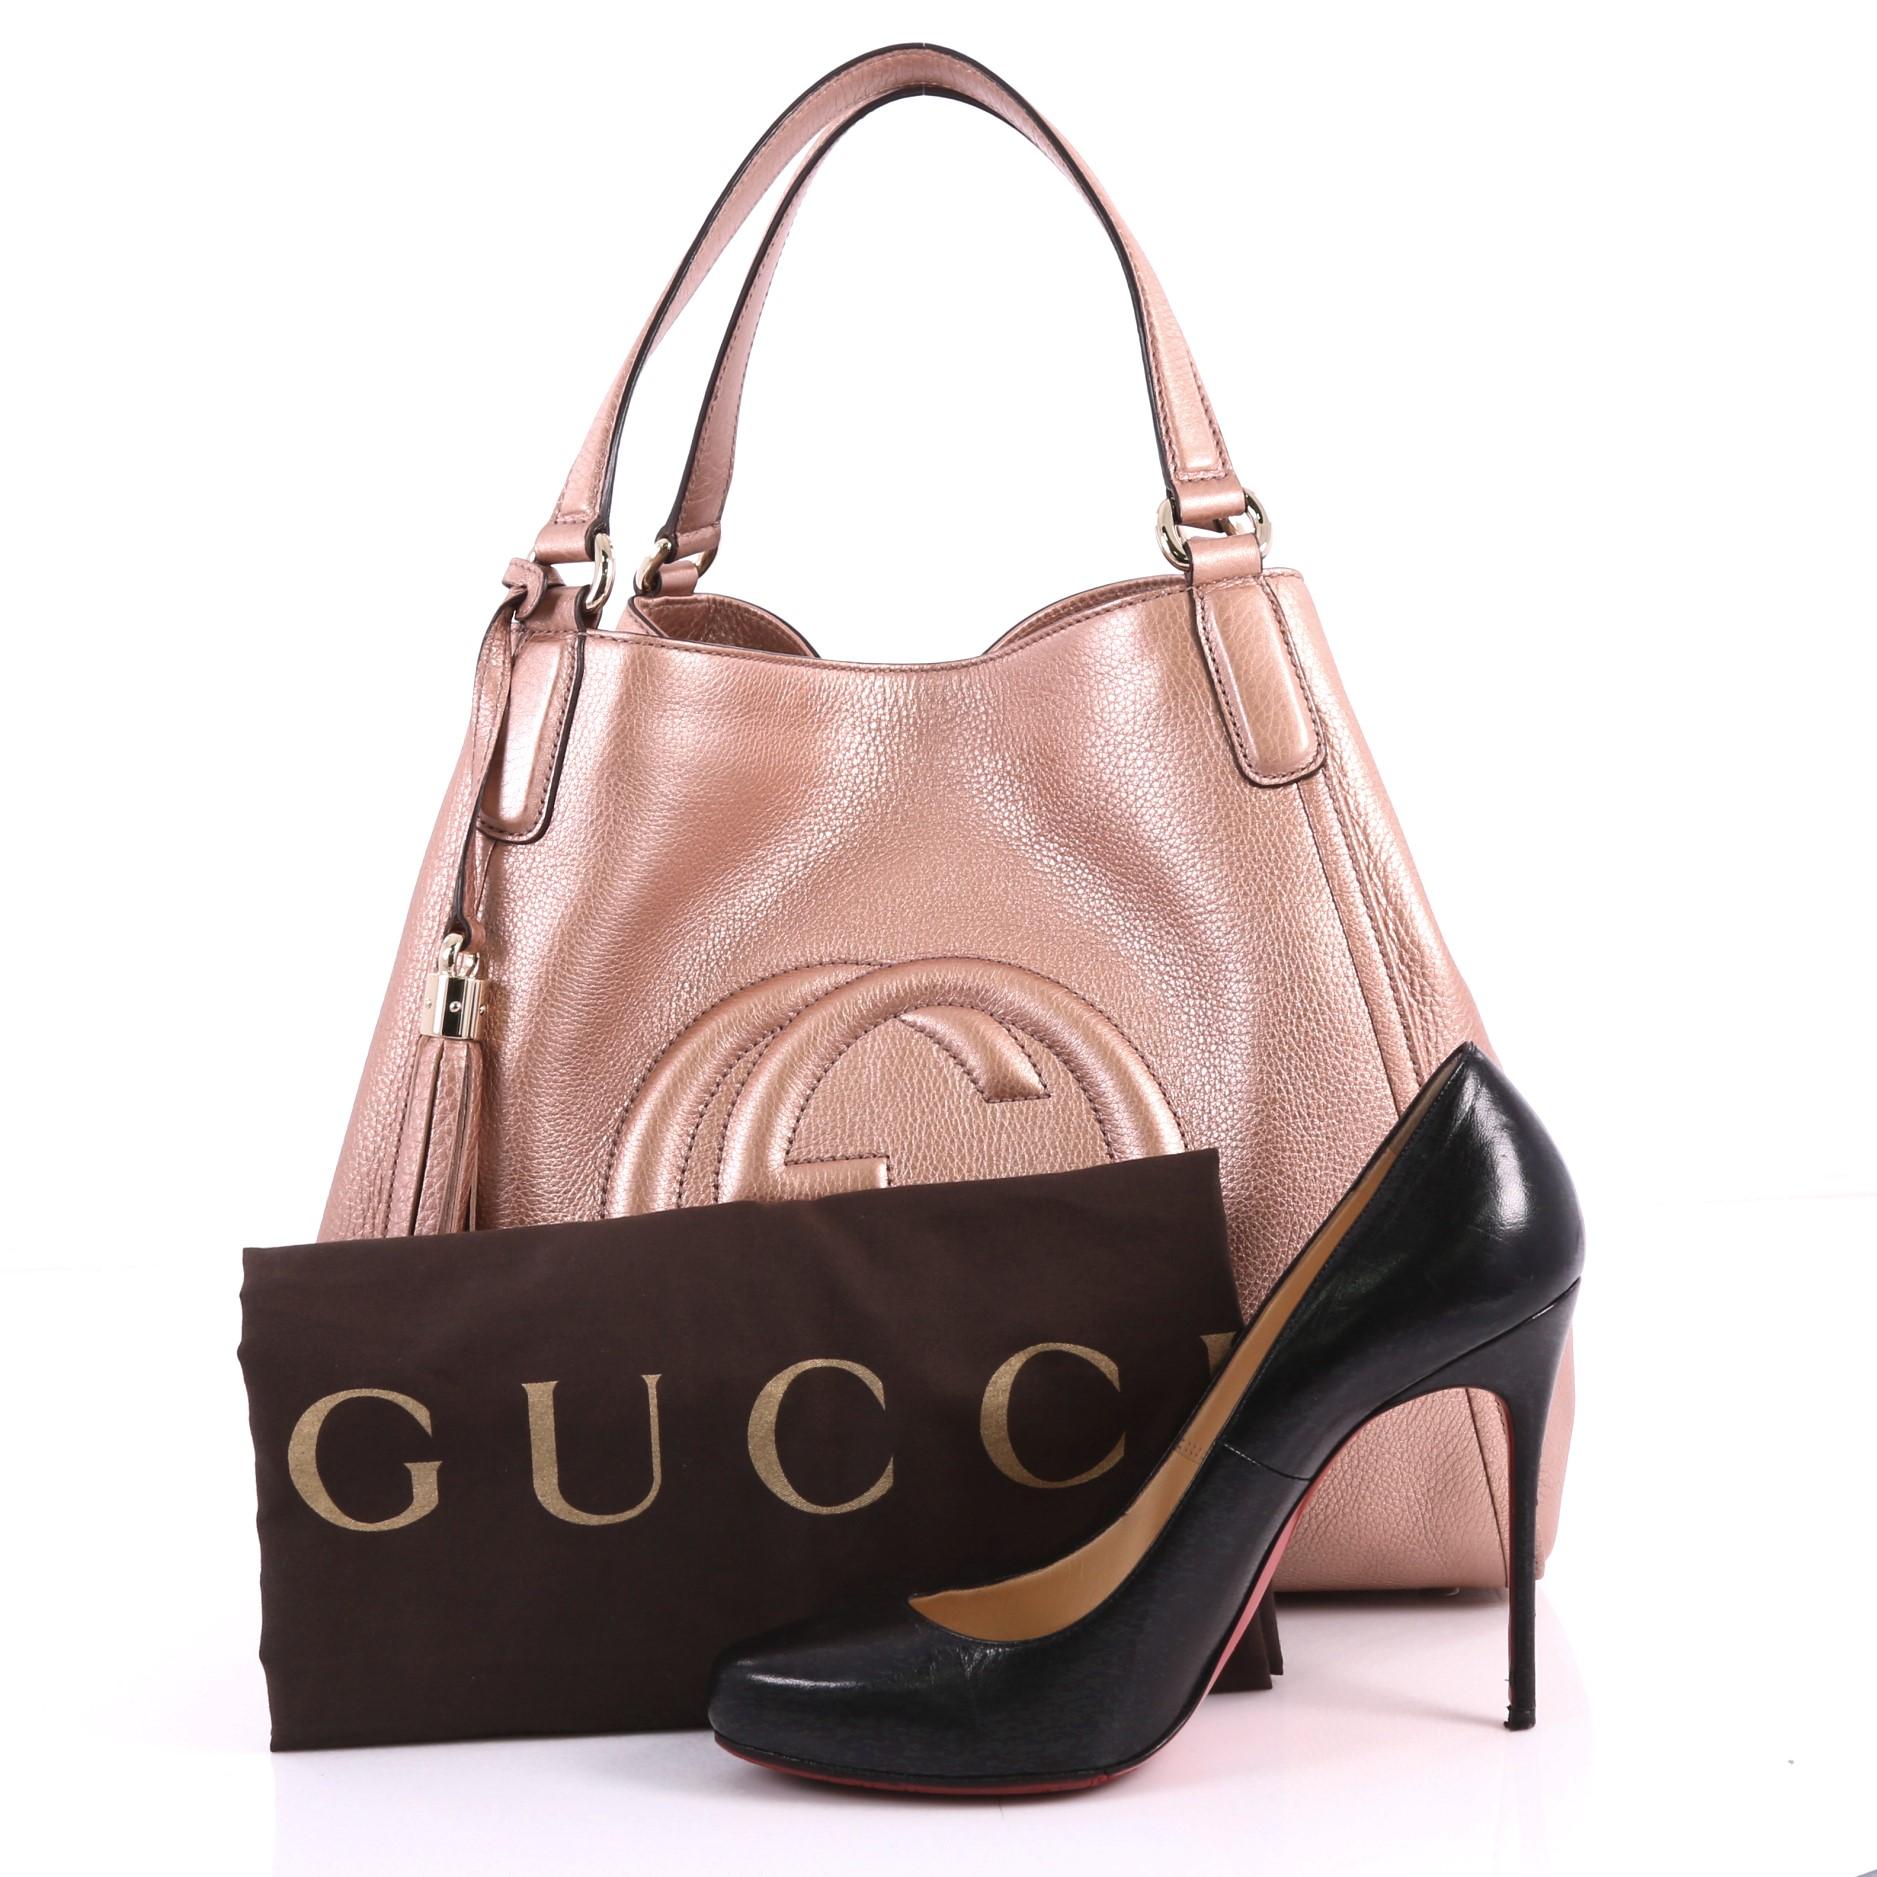 This authentic Gucci Soho Shoulder Bag Leather Medium is simple yet stylish in design. Crafted in rose leather, this hobo features dual-flat leather handles, fringe tassel, protective base studs, signature interlocking Gucci logo stitched in front